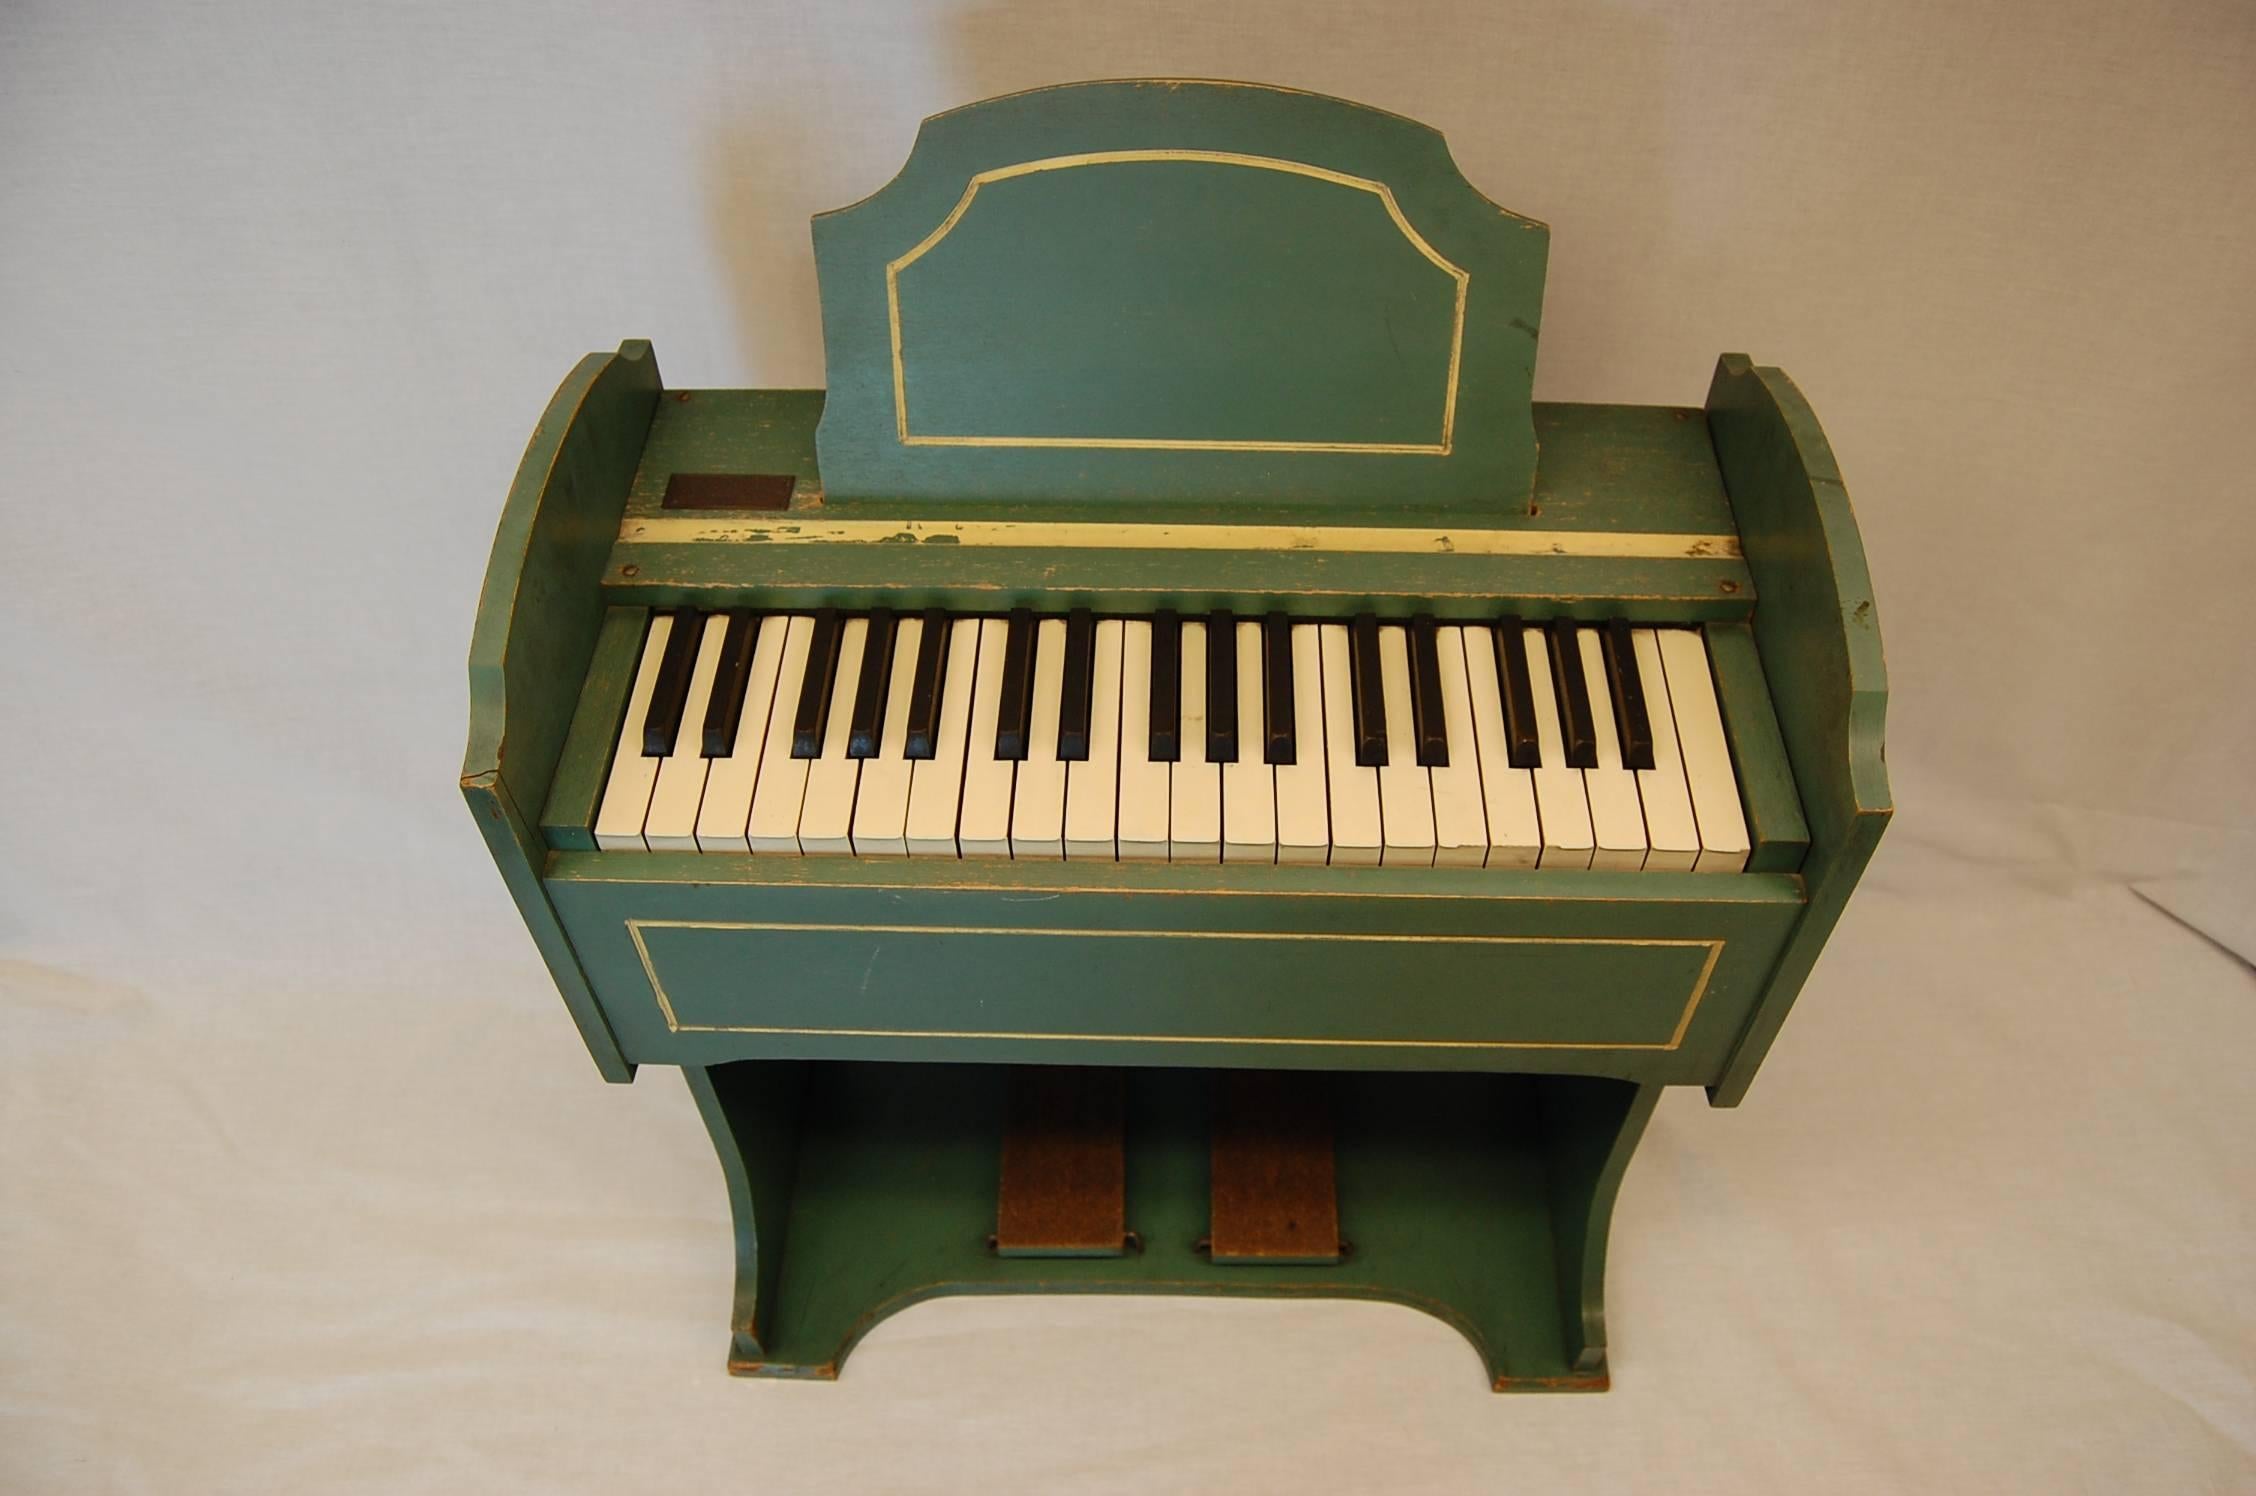 Painted Childs Pump Organ circa 1940 by the Estey Organ Corporation